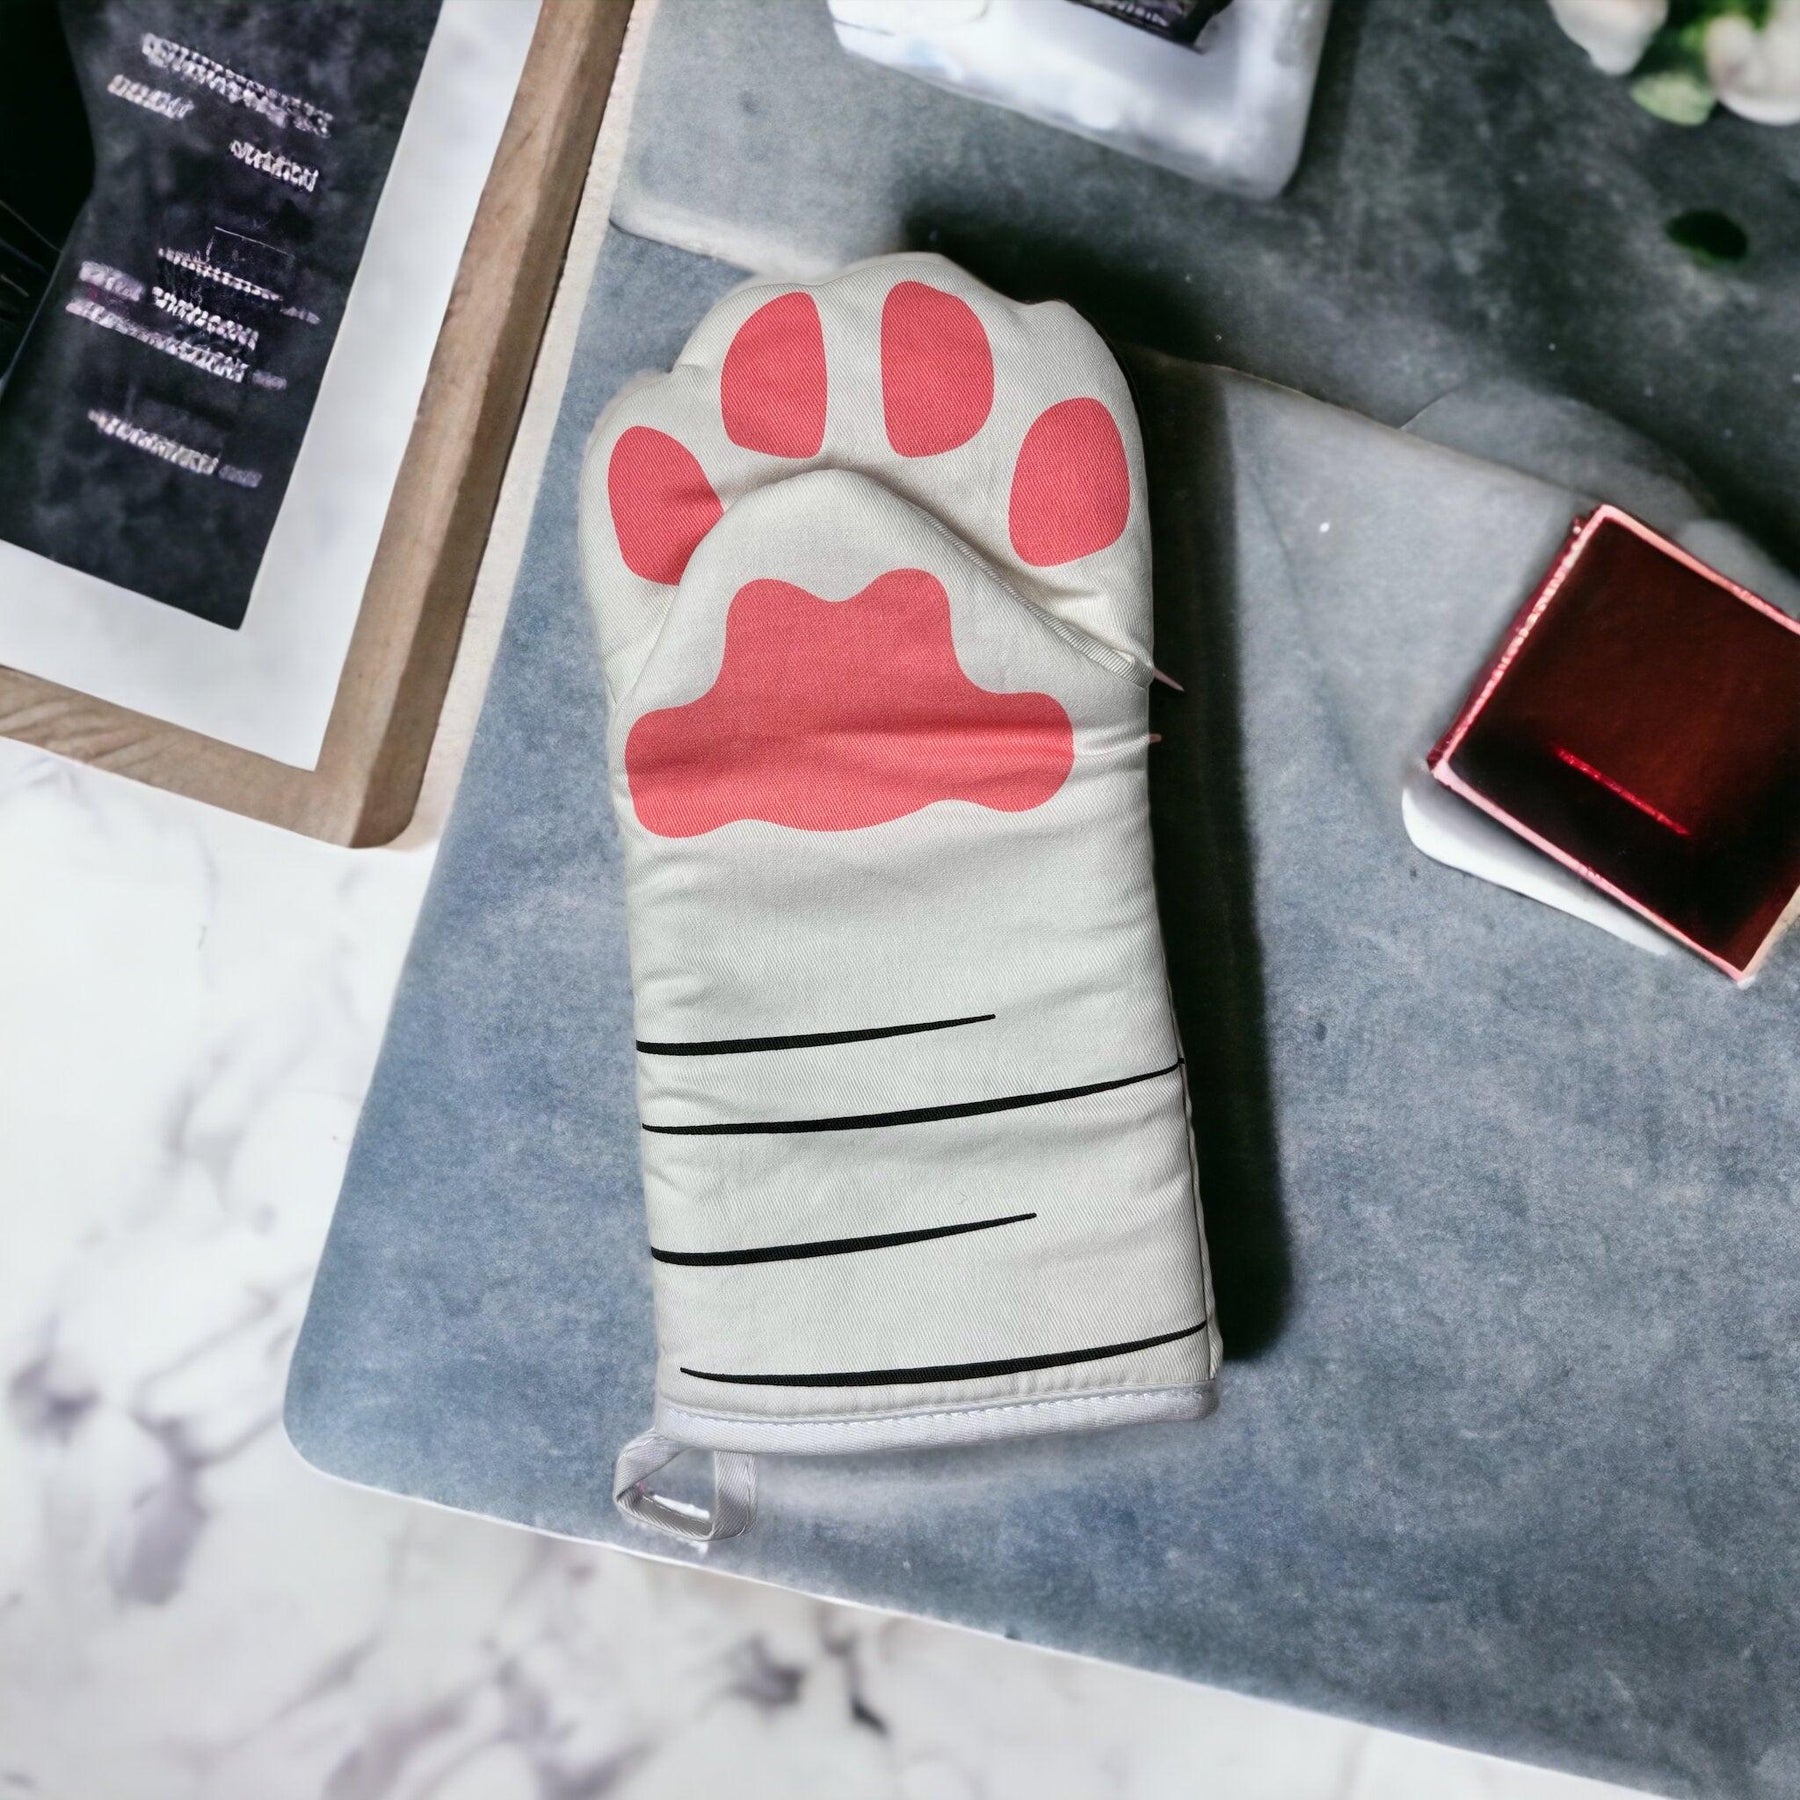 Purrfect Paws: Whisker-Approved Oven Gloves! - PAWS CLUB